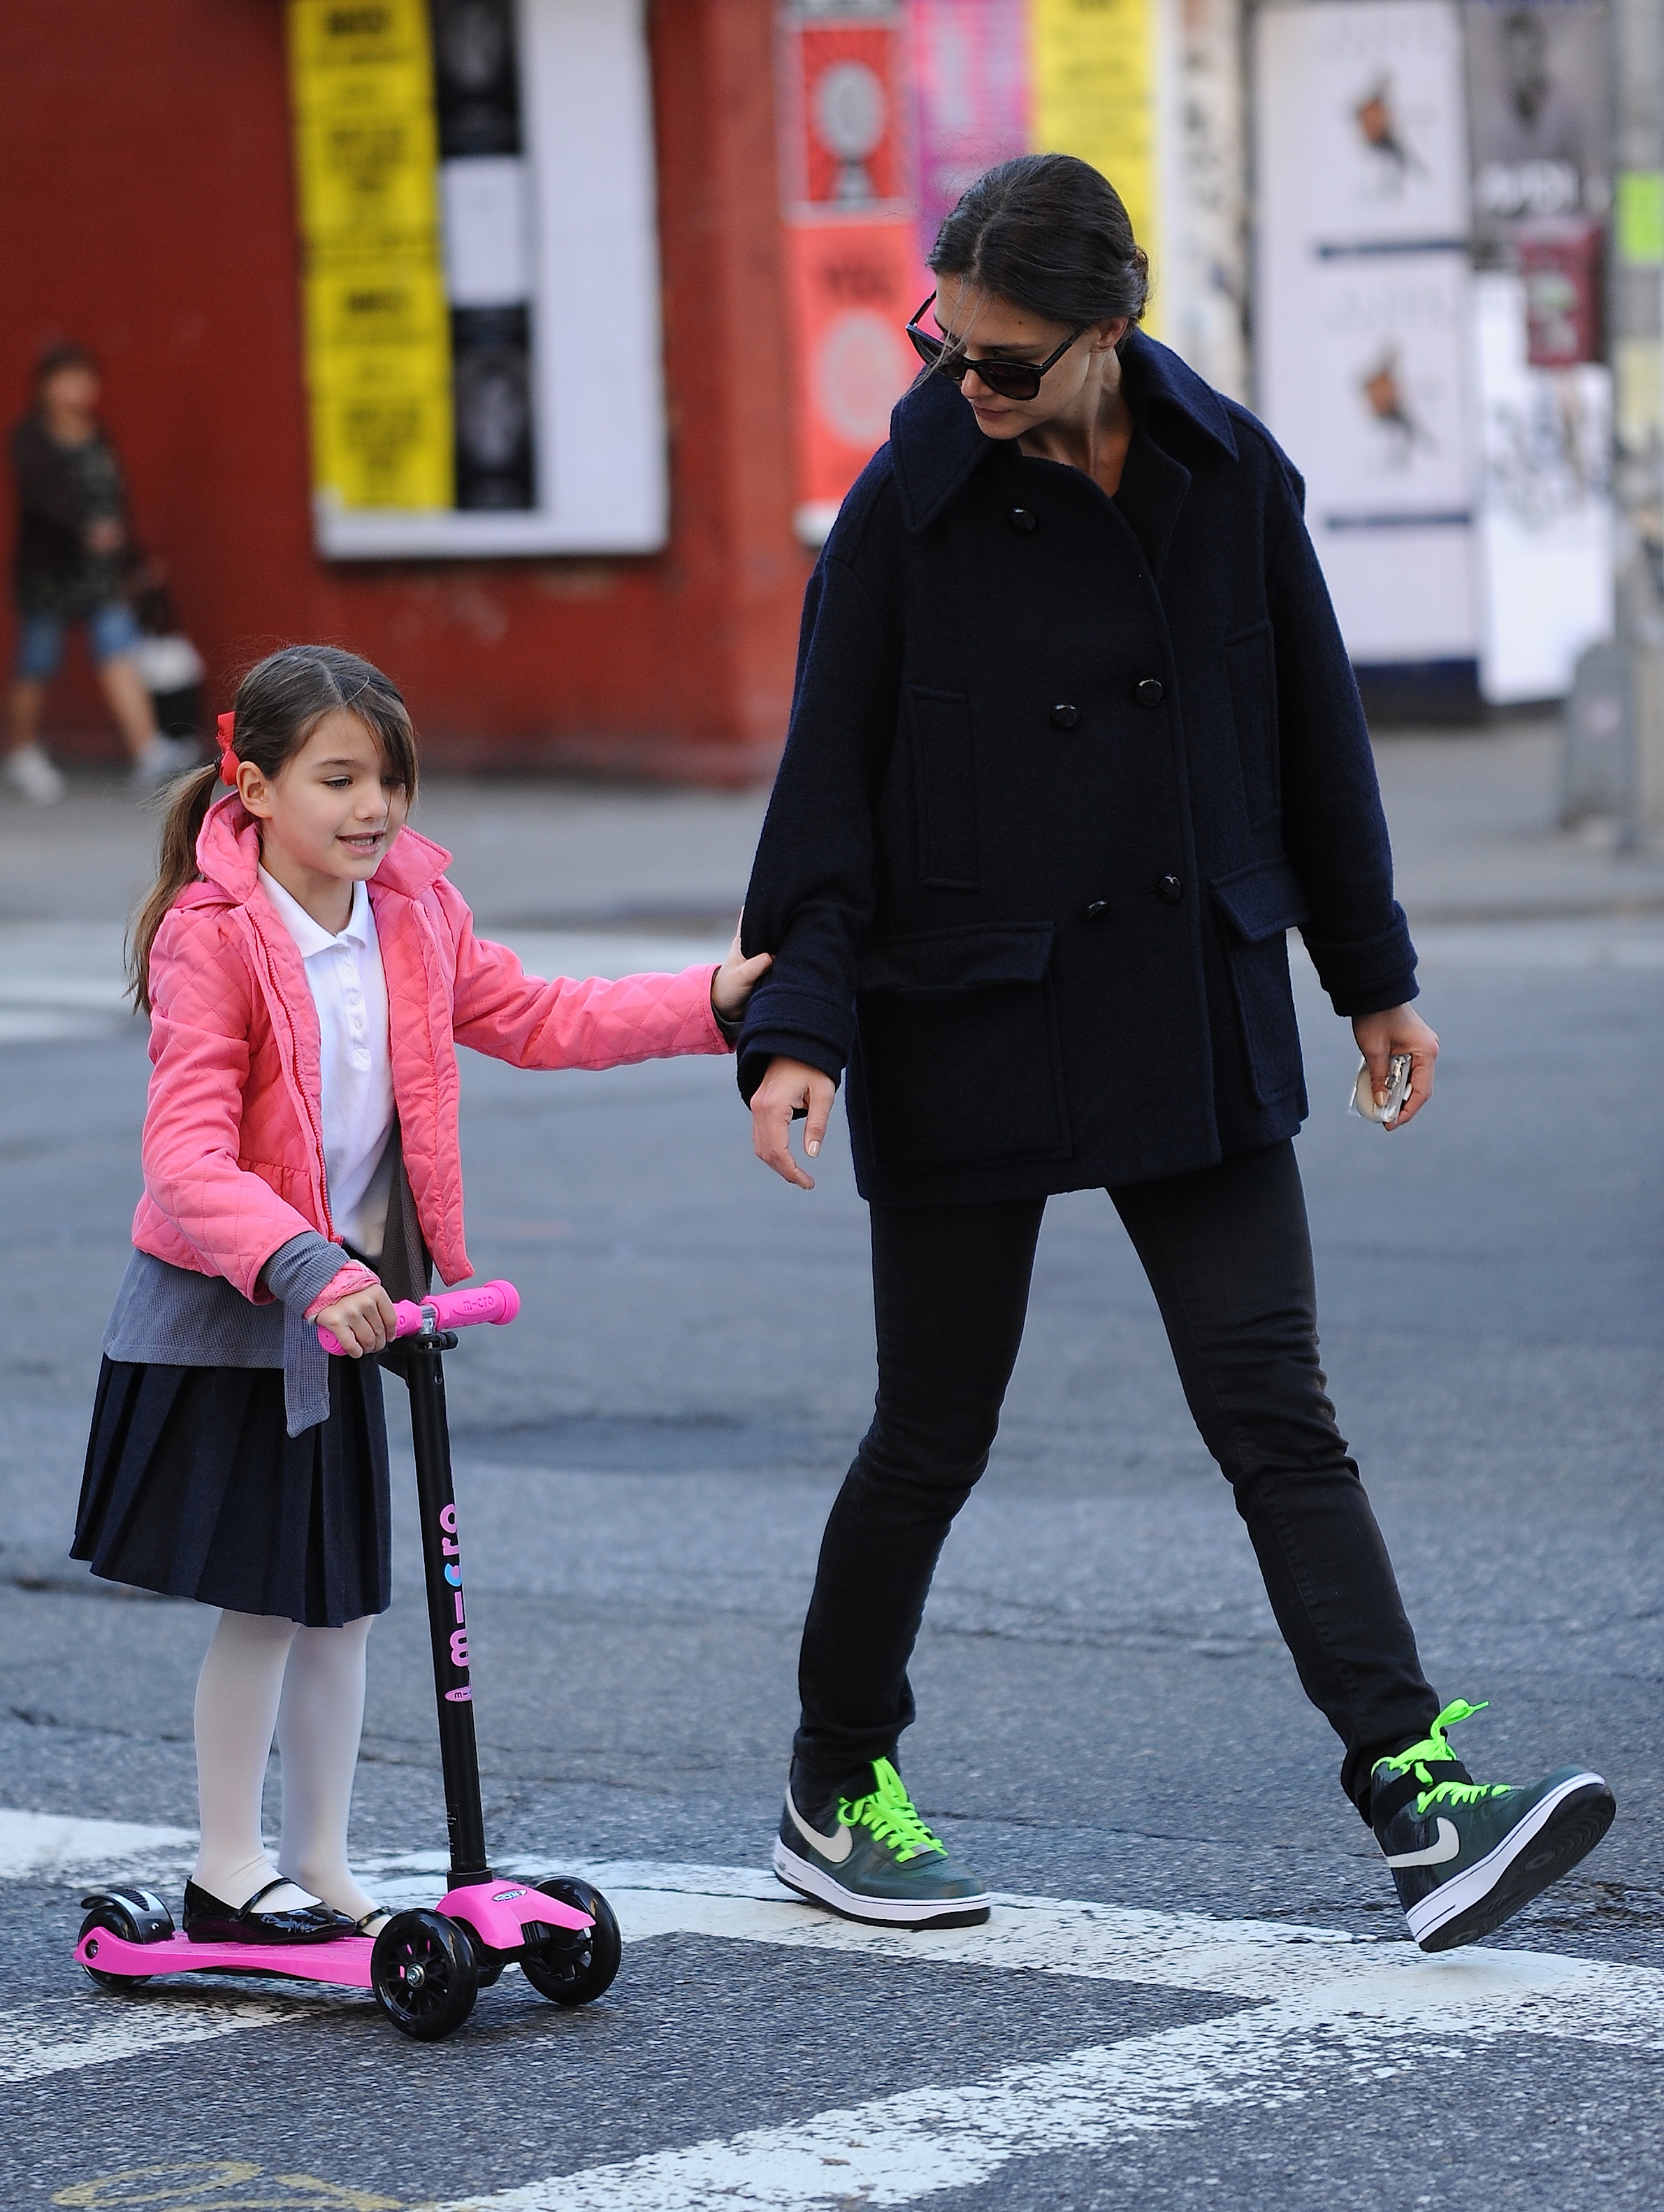 Katie Holmes sighted helping Suri Cruise to scooter in New York City, on October 8, 2013. | Source: Getty Images